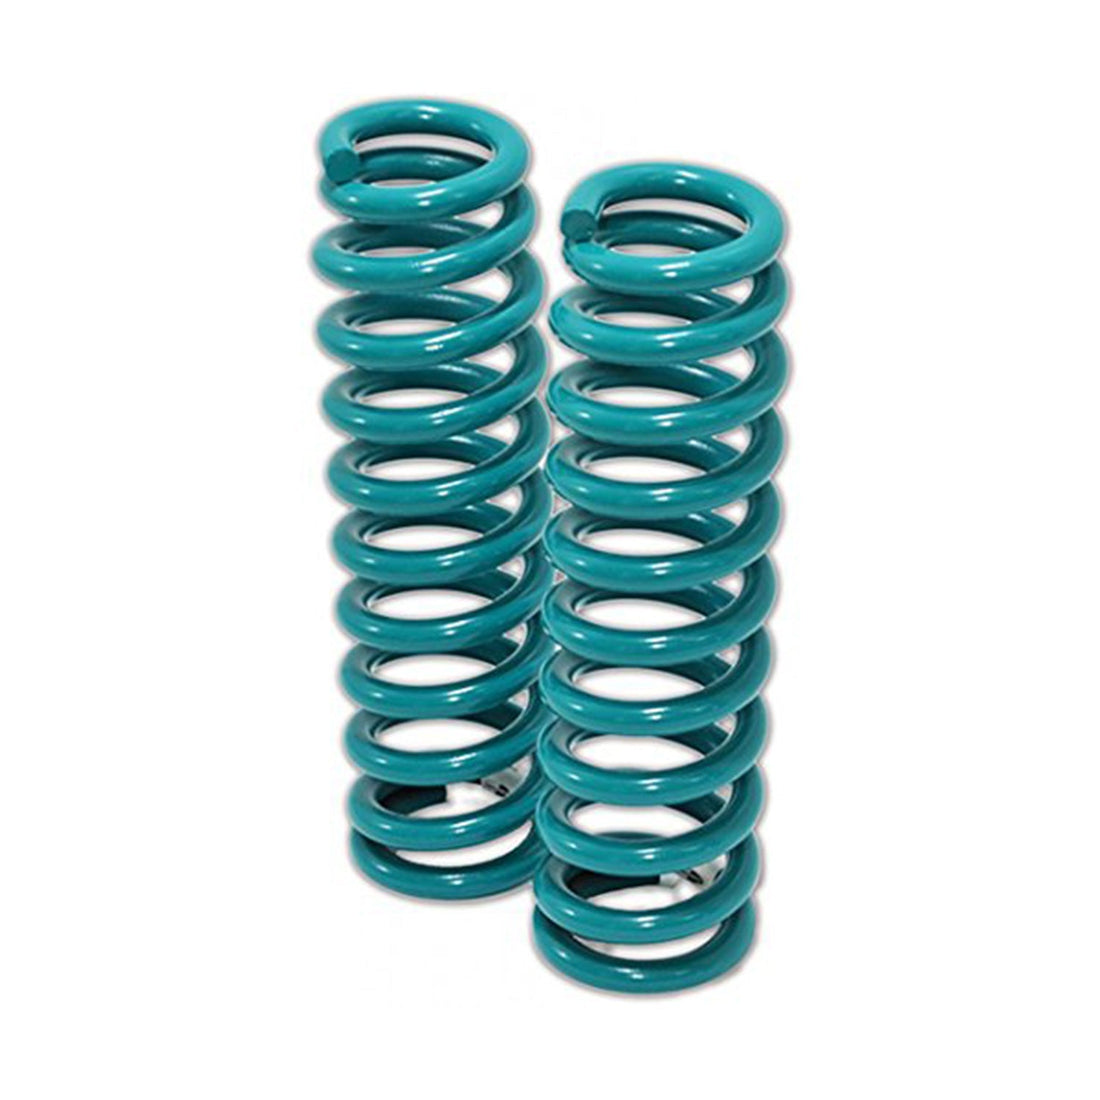 Dobinsons Rear Lift Coil Springs for Toyota Fortuner 35mm lift 2005-2015 and 30mm 2015-on (C59-355)